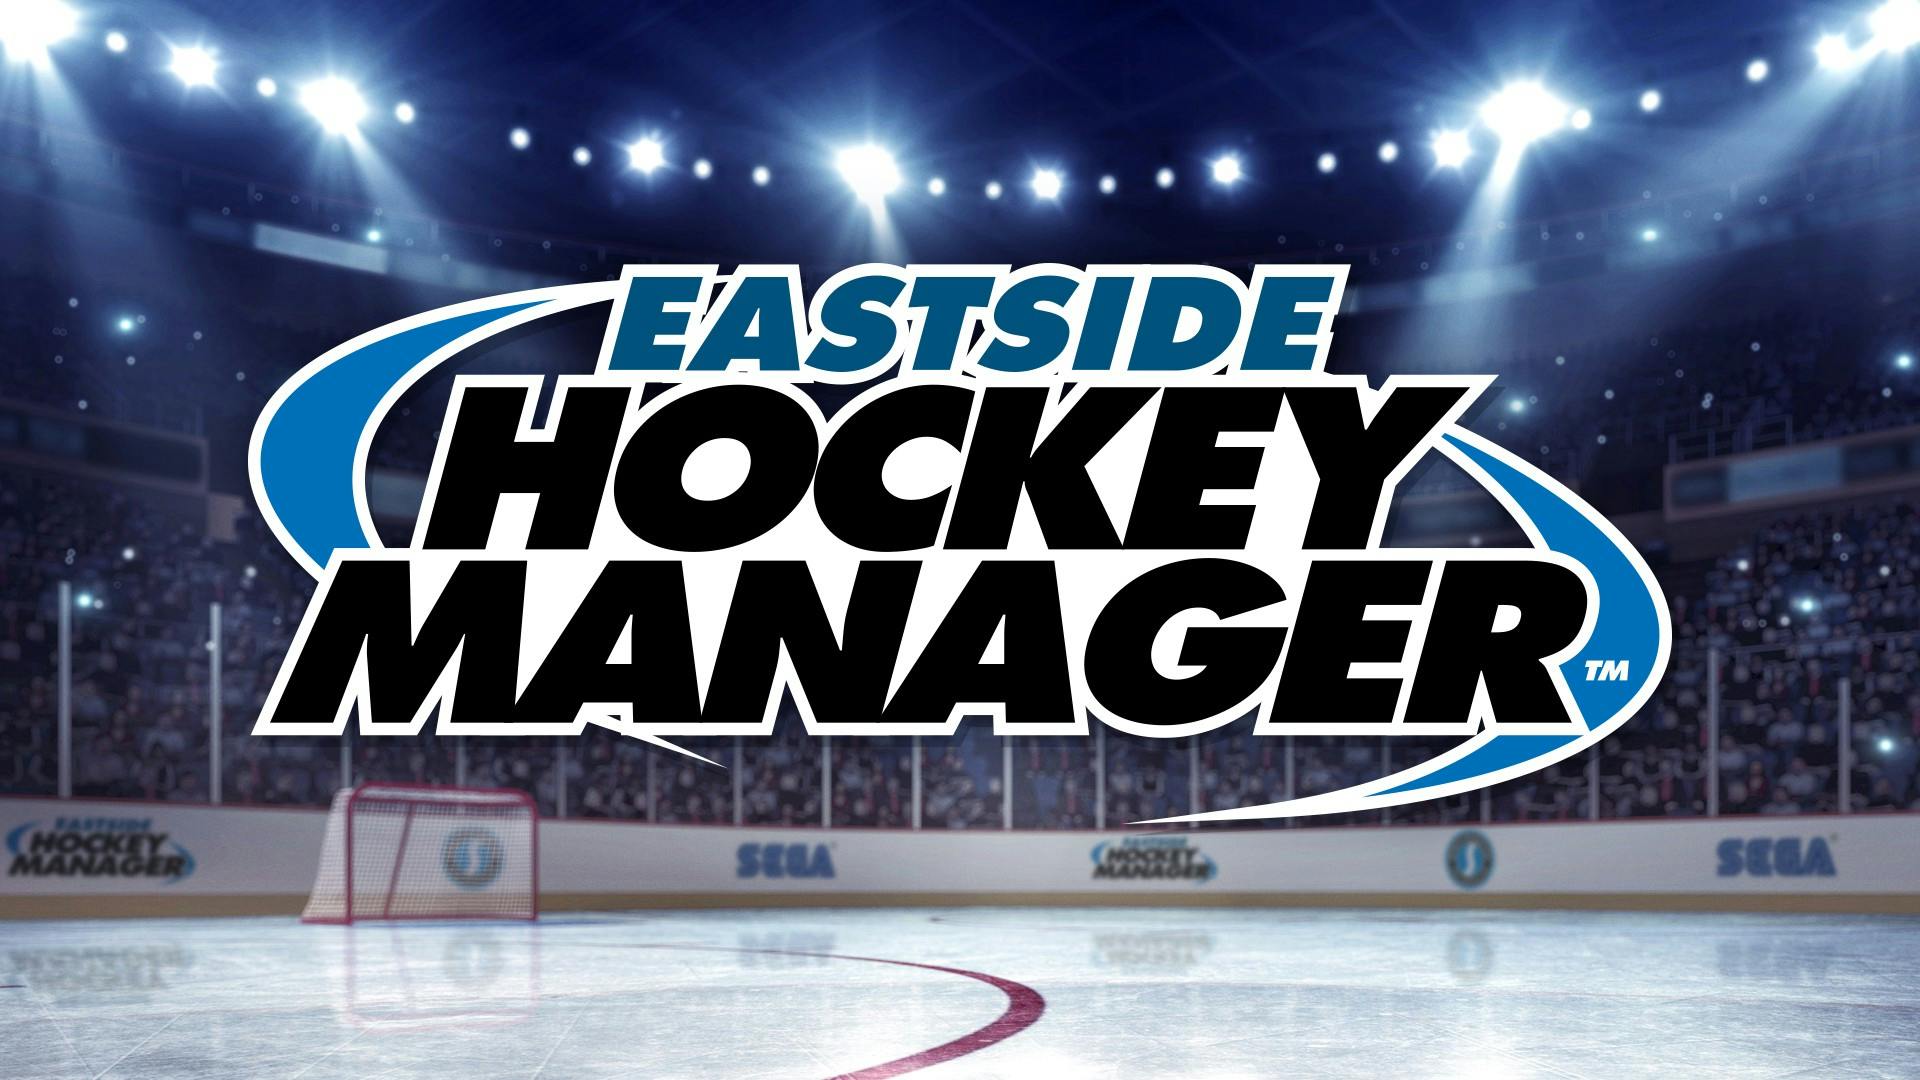 Steam franchise hockey manager фото 80